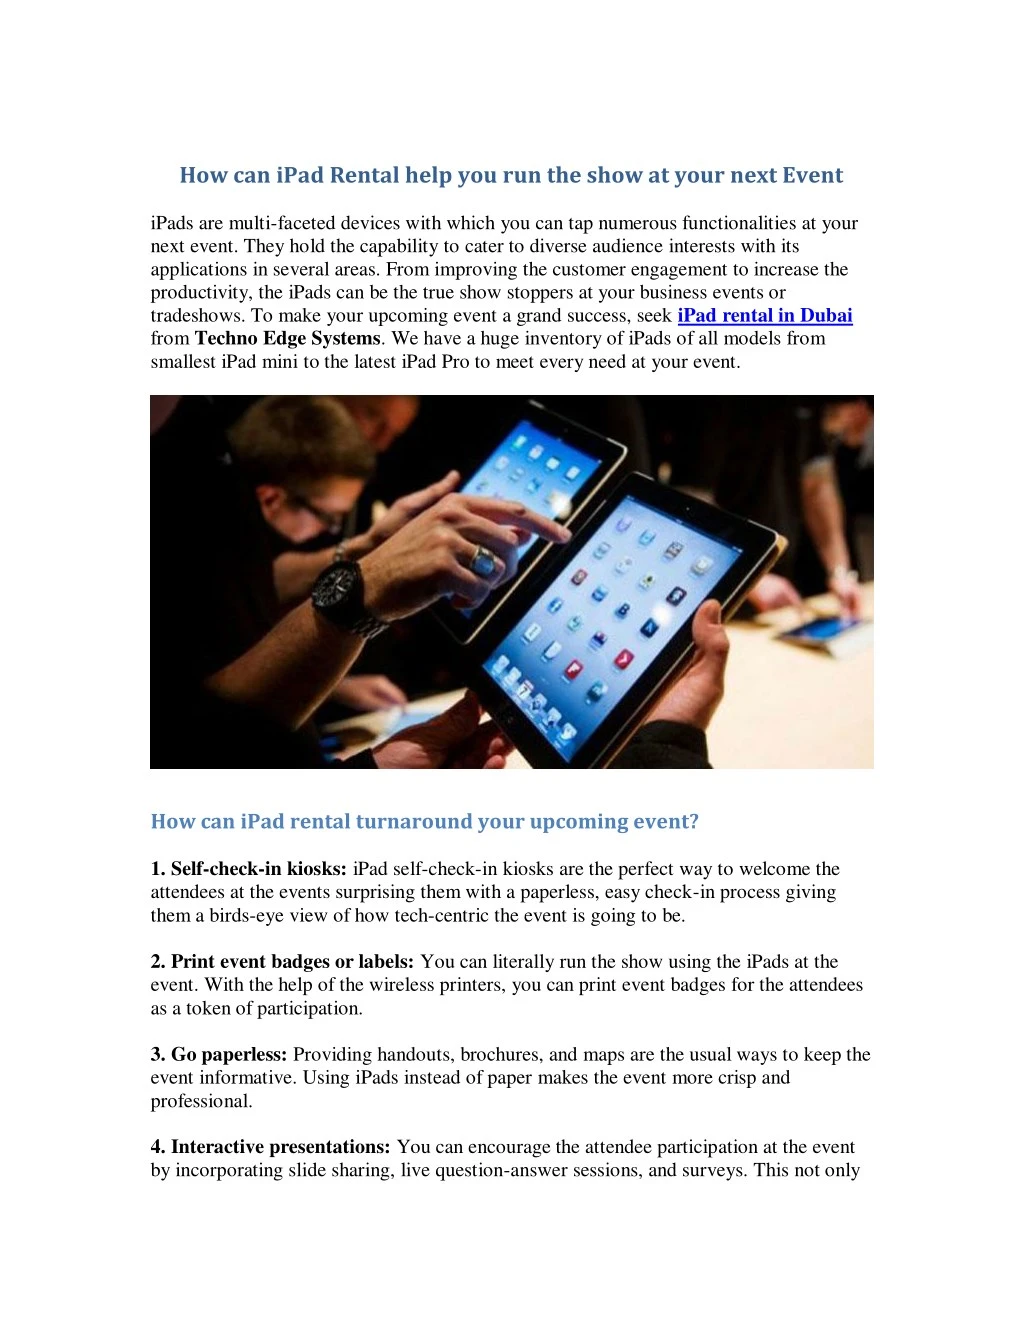 how can ipad rental help you run the show at your